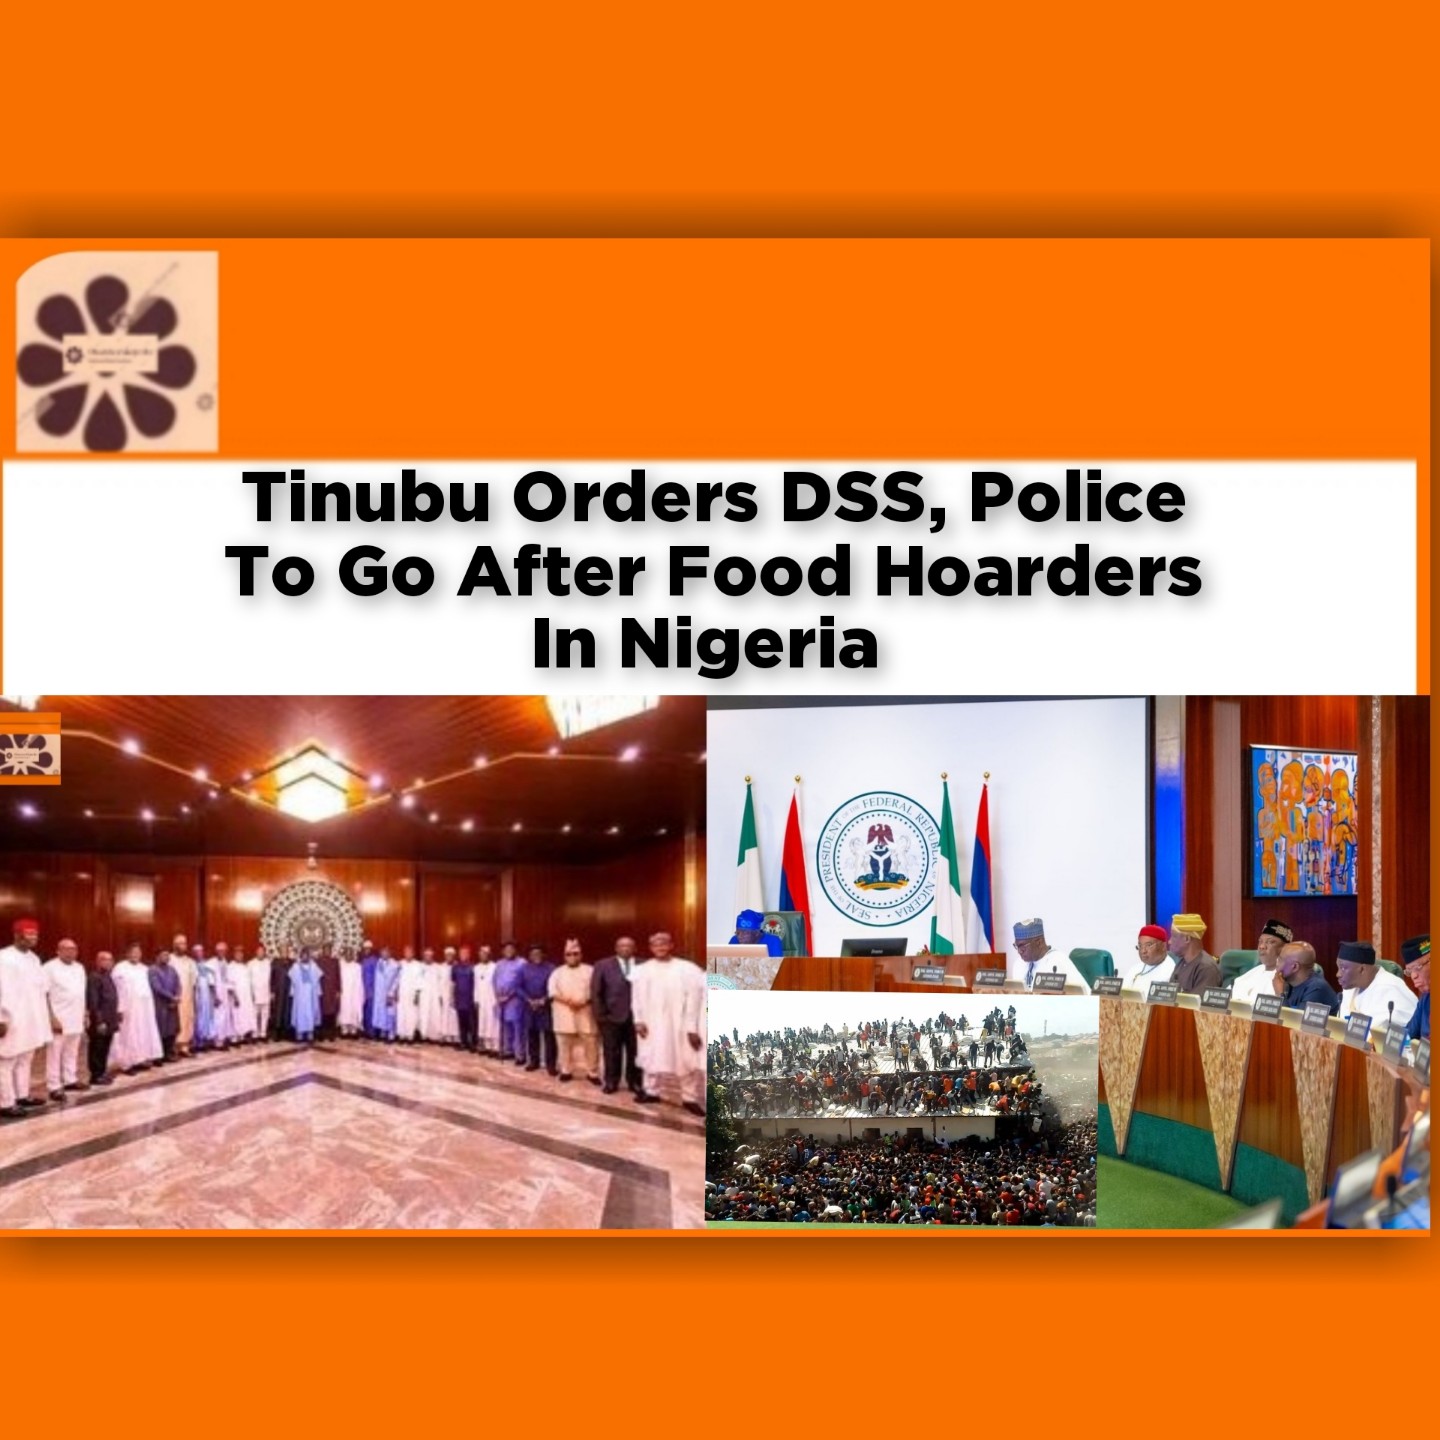 Tinubu Orders DSS, Police To Go After Food Hoarders In Nigeria ~ OsazuwaAkonedo #‘hunger #Bola #Food #Hoarders #Inflation #Kano #Nigeria #Tinubu